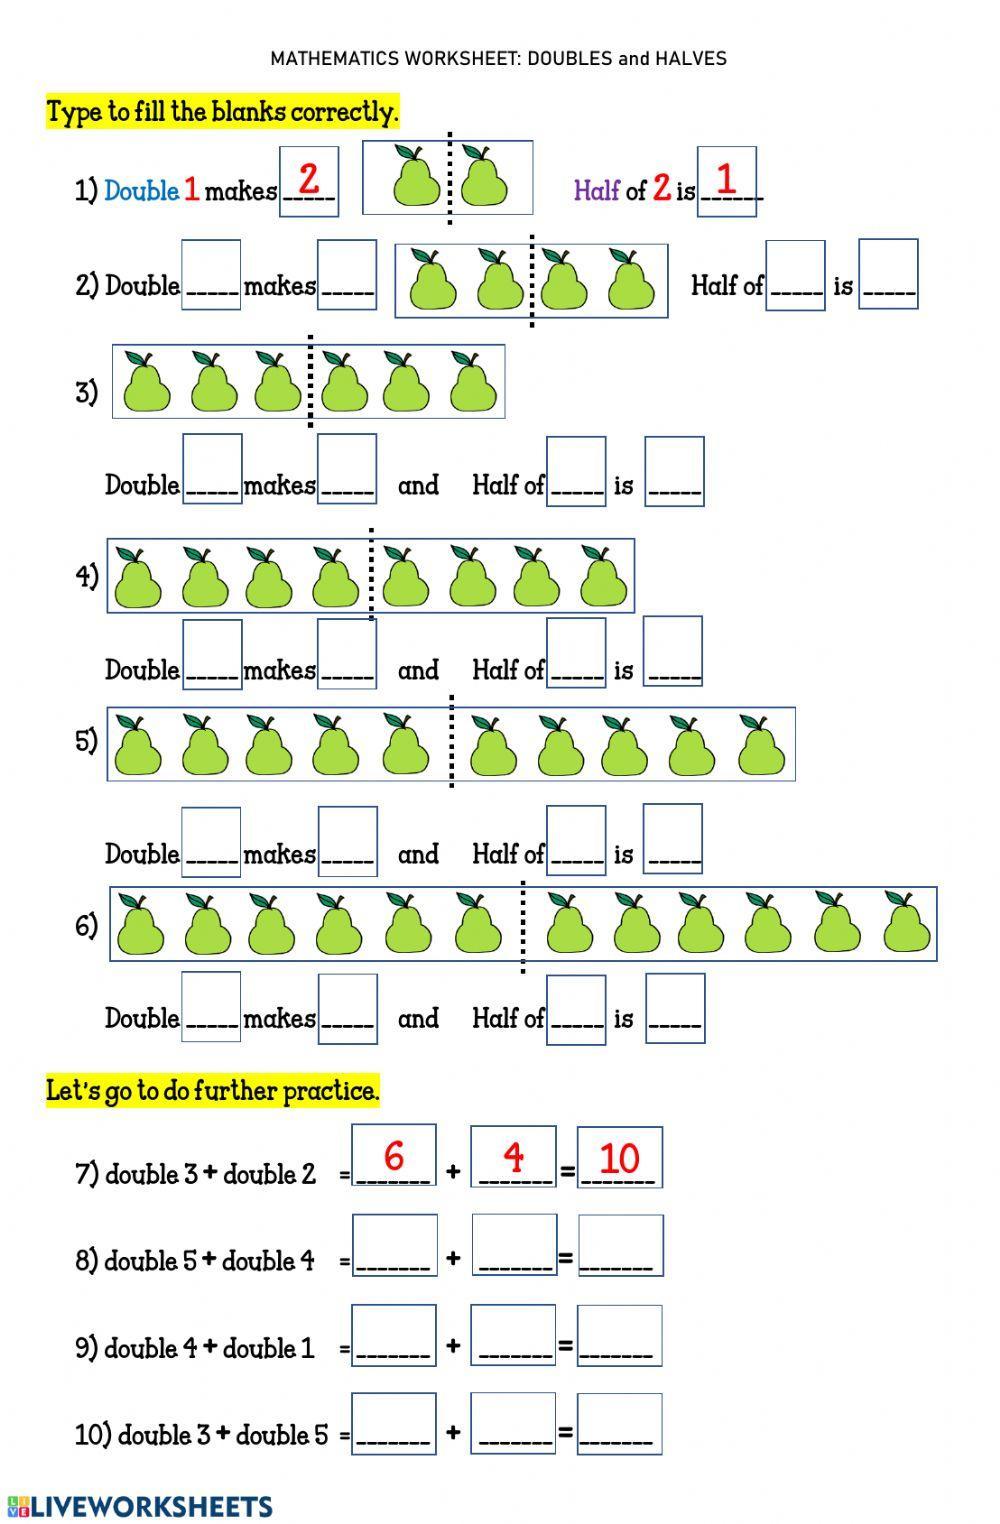 Worksheet 15 DOUBLES and HALVES Further Practice